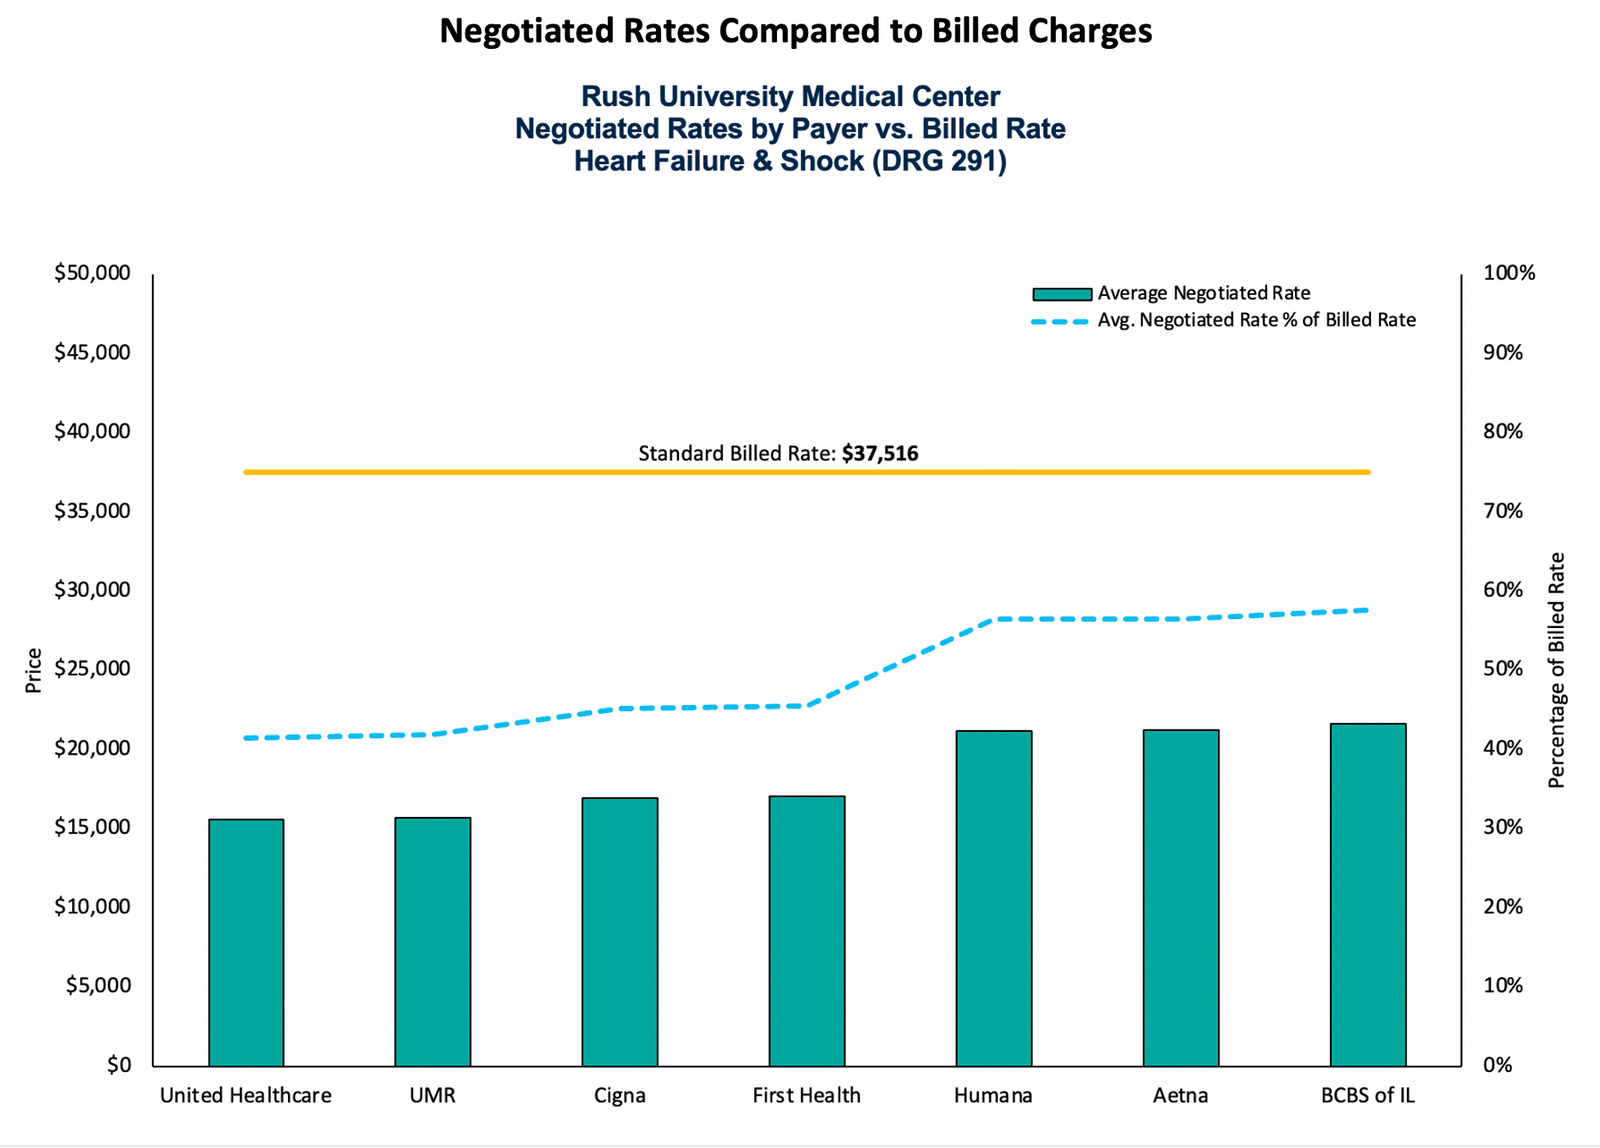 A graph showing negotiated rates at Rush University